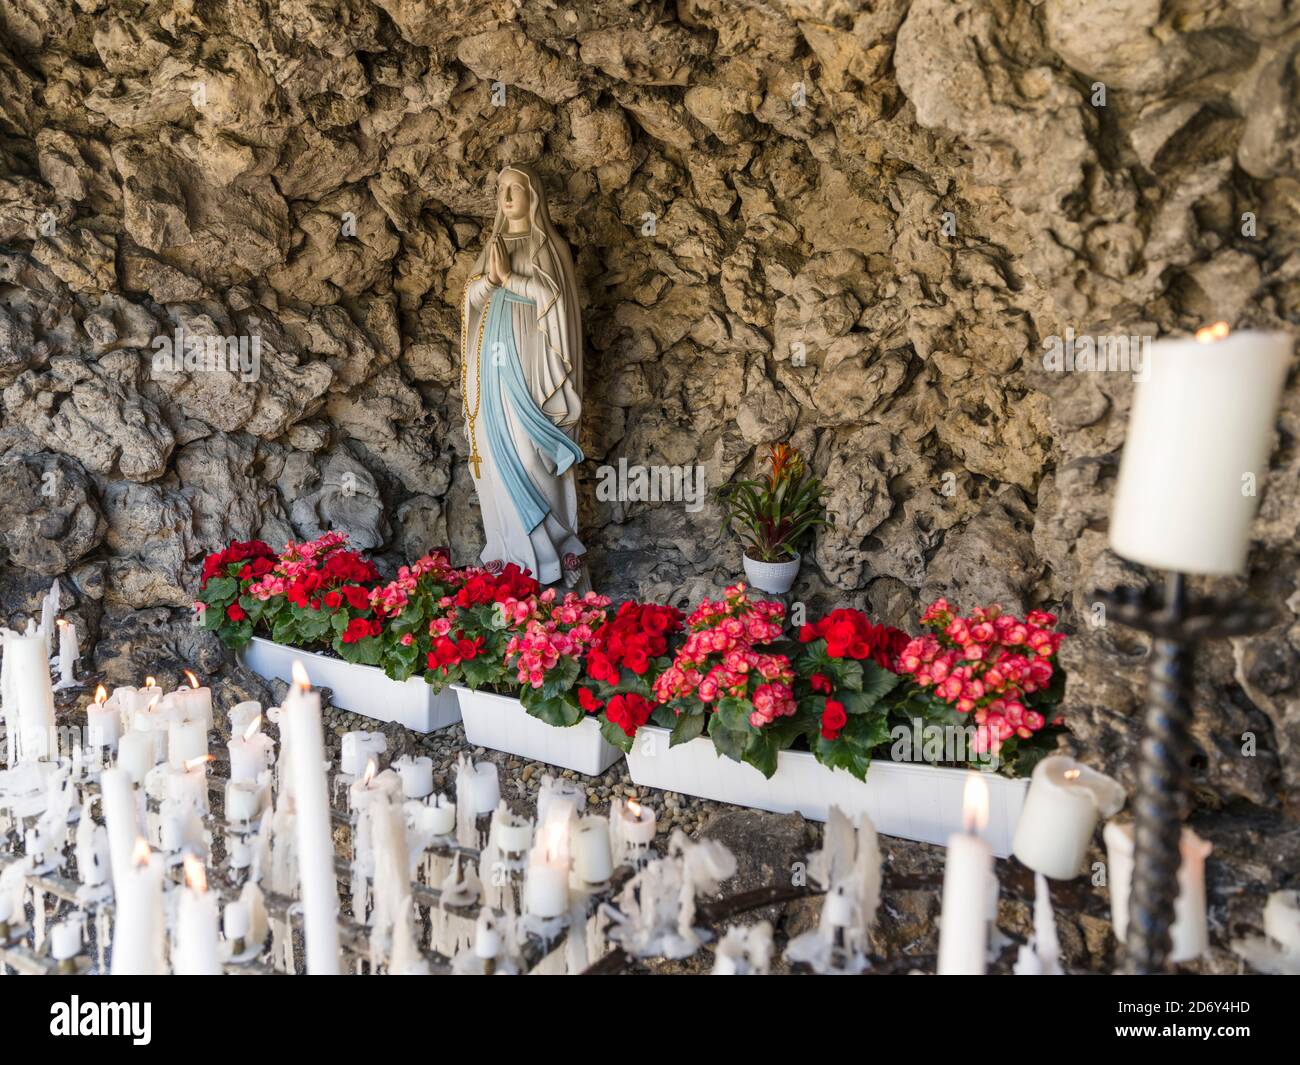 Basilica Goessweinstein, buildt by Balthasar Neumann. The grotto of St. Mary or Lourdes Grotto. Goessweinstein the most important place of pilgrimage Stock Photo